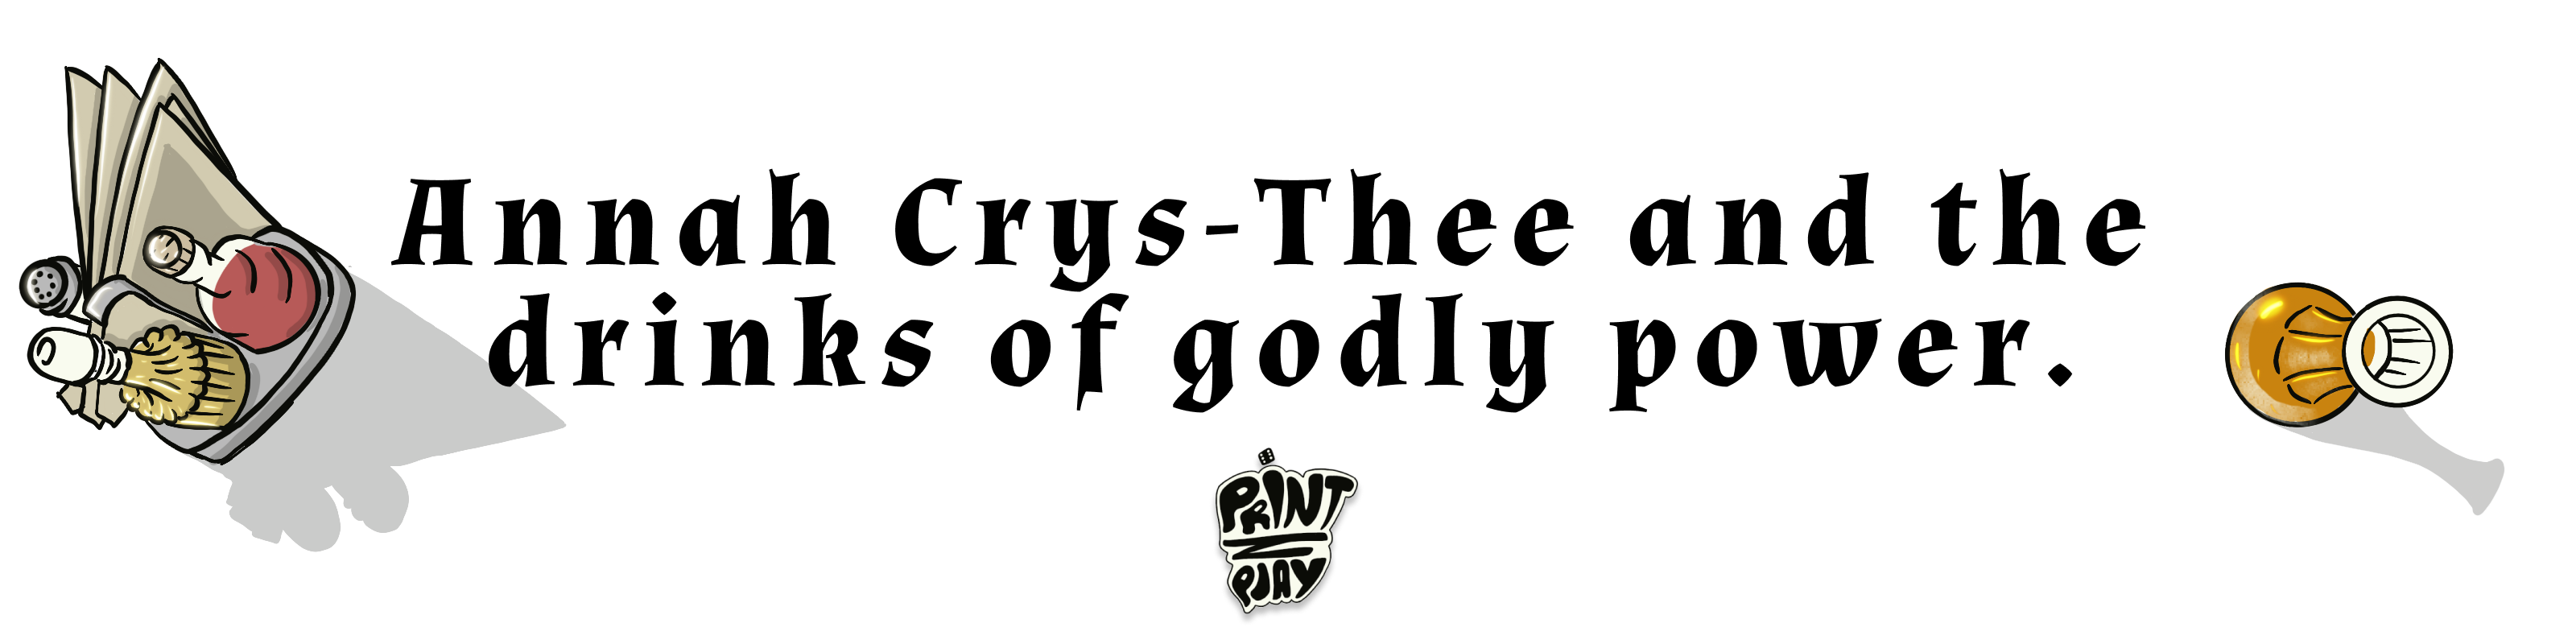 PrintNplay - Annah Crys-Thee and the drinks of godly power